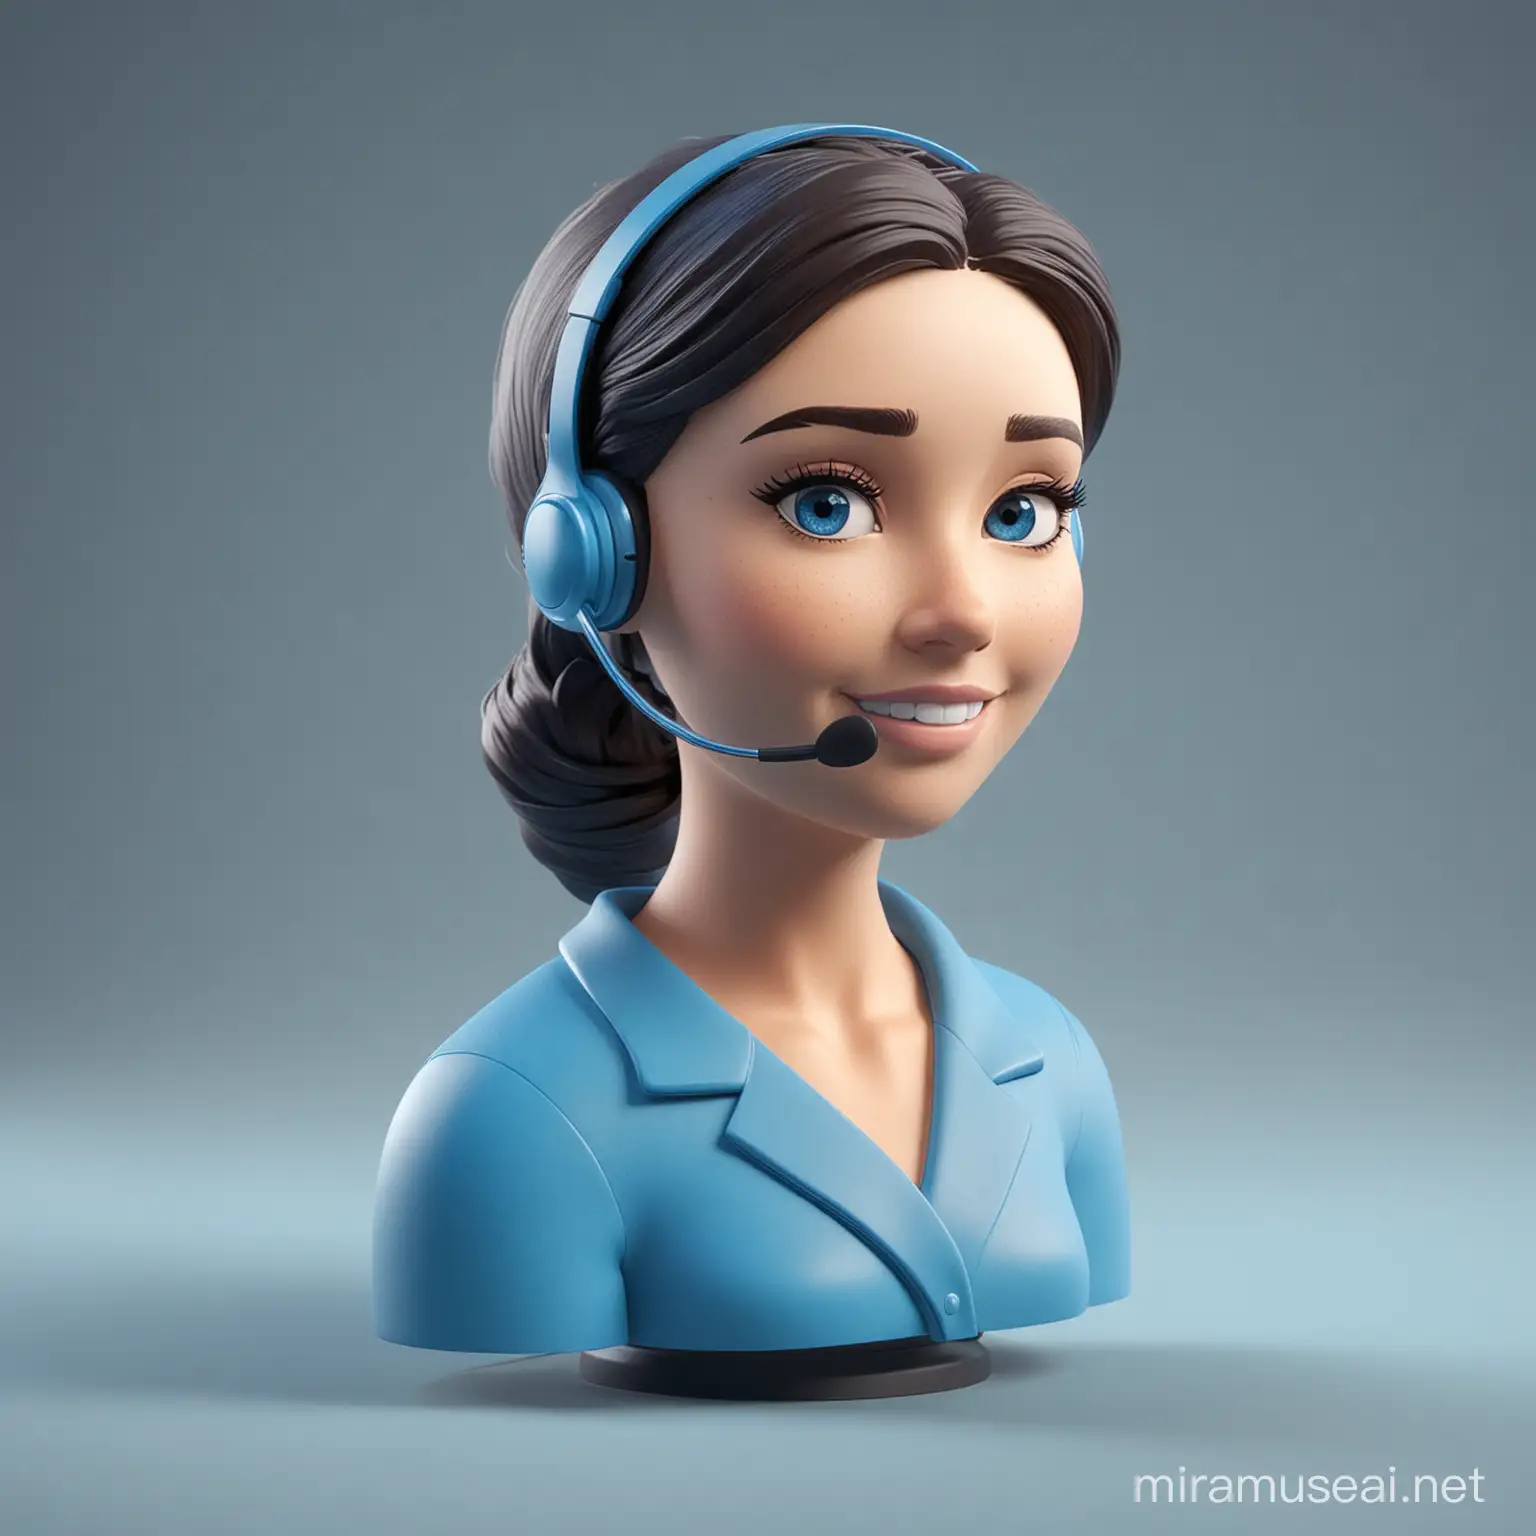 a 3d asset in blue describing "24/7 Virtual Receptionist" functionality